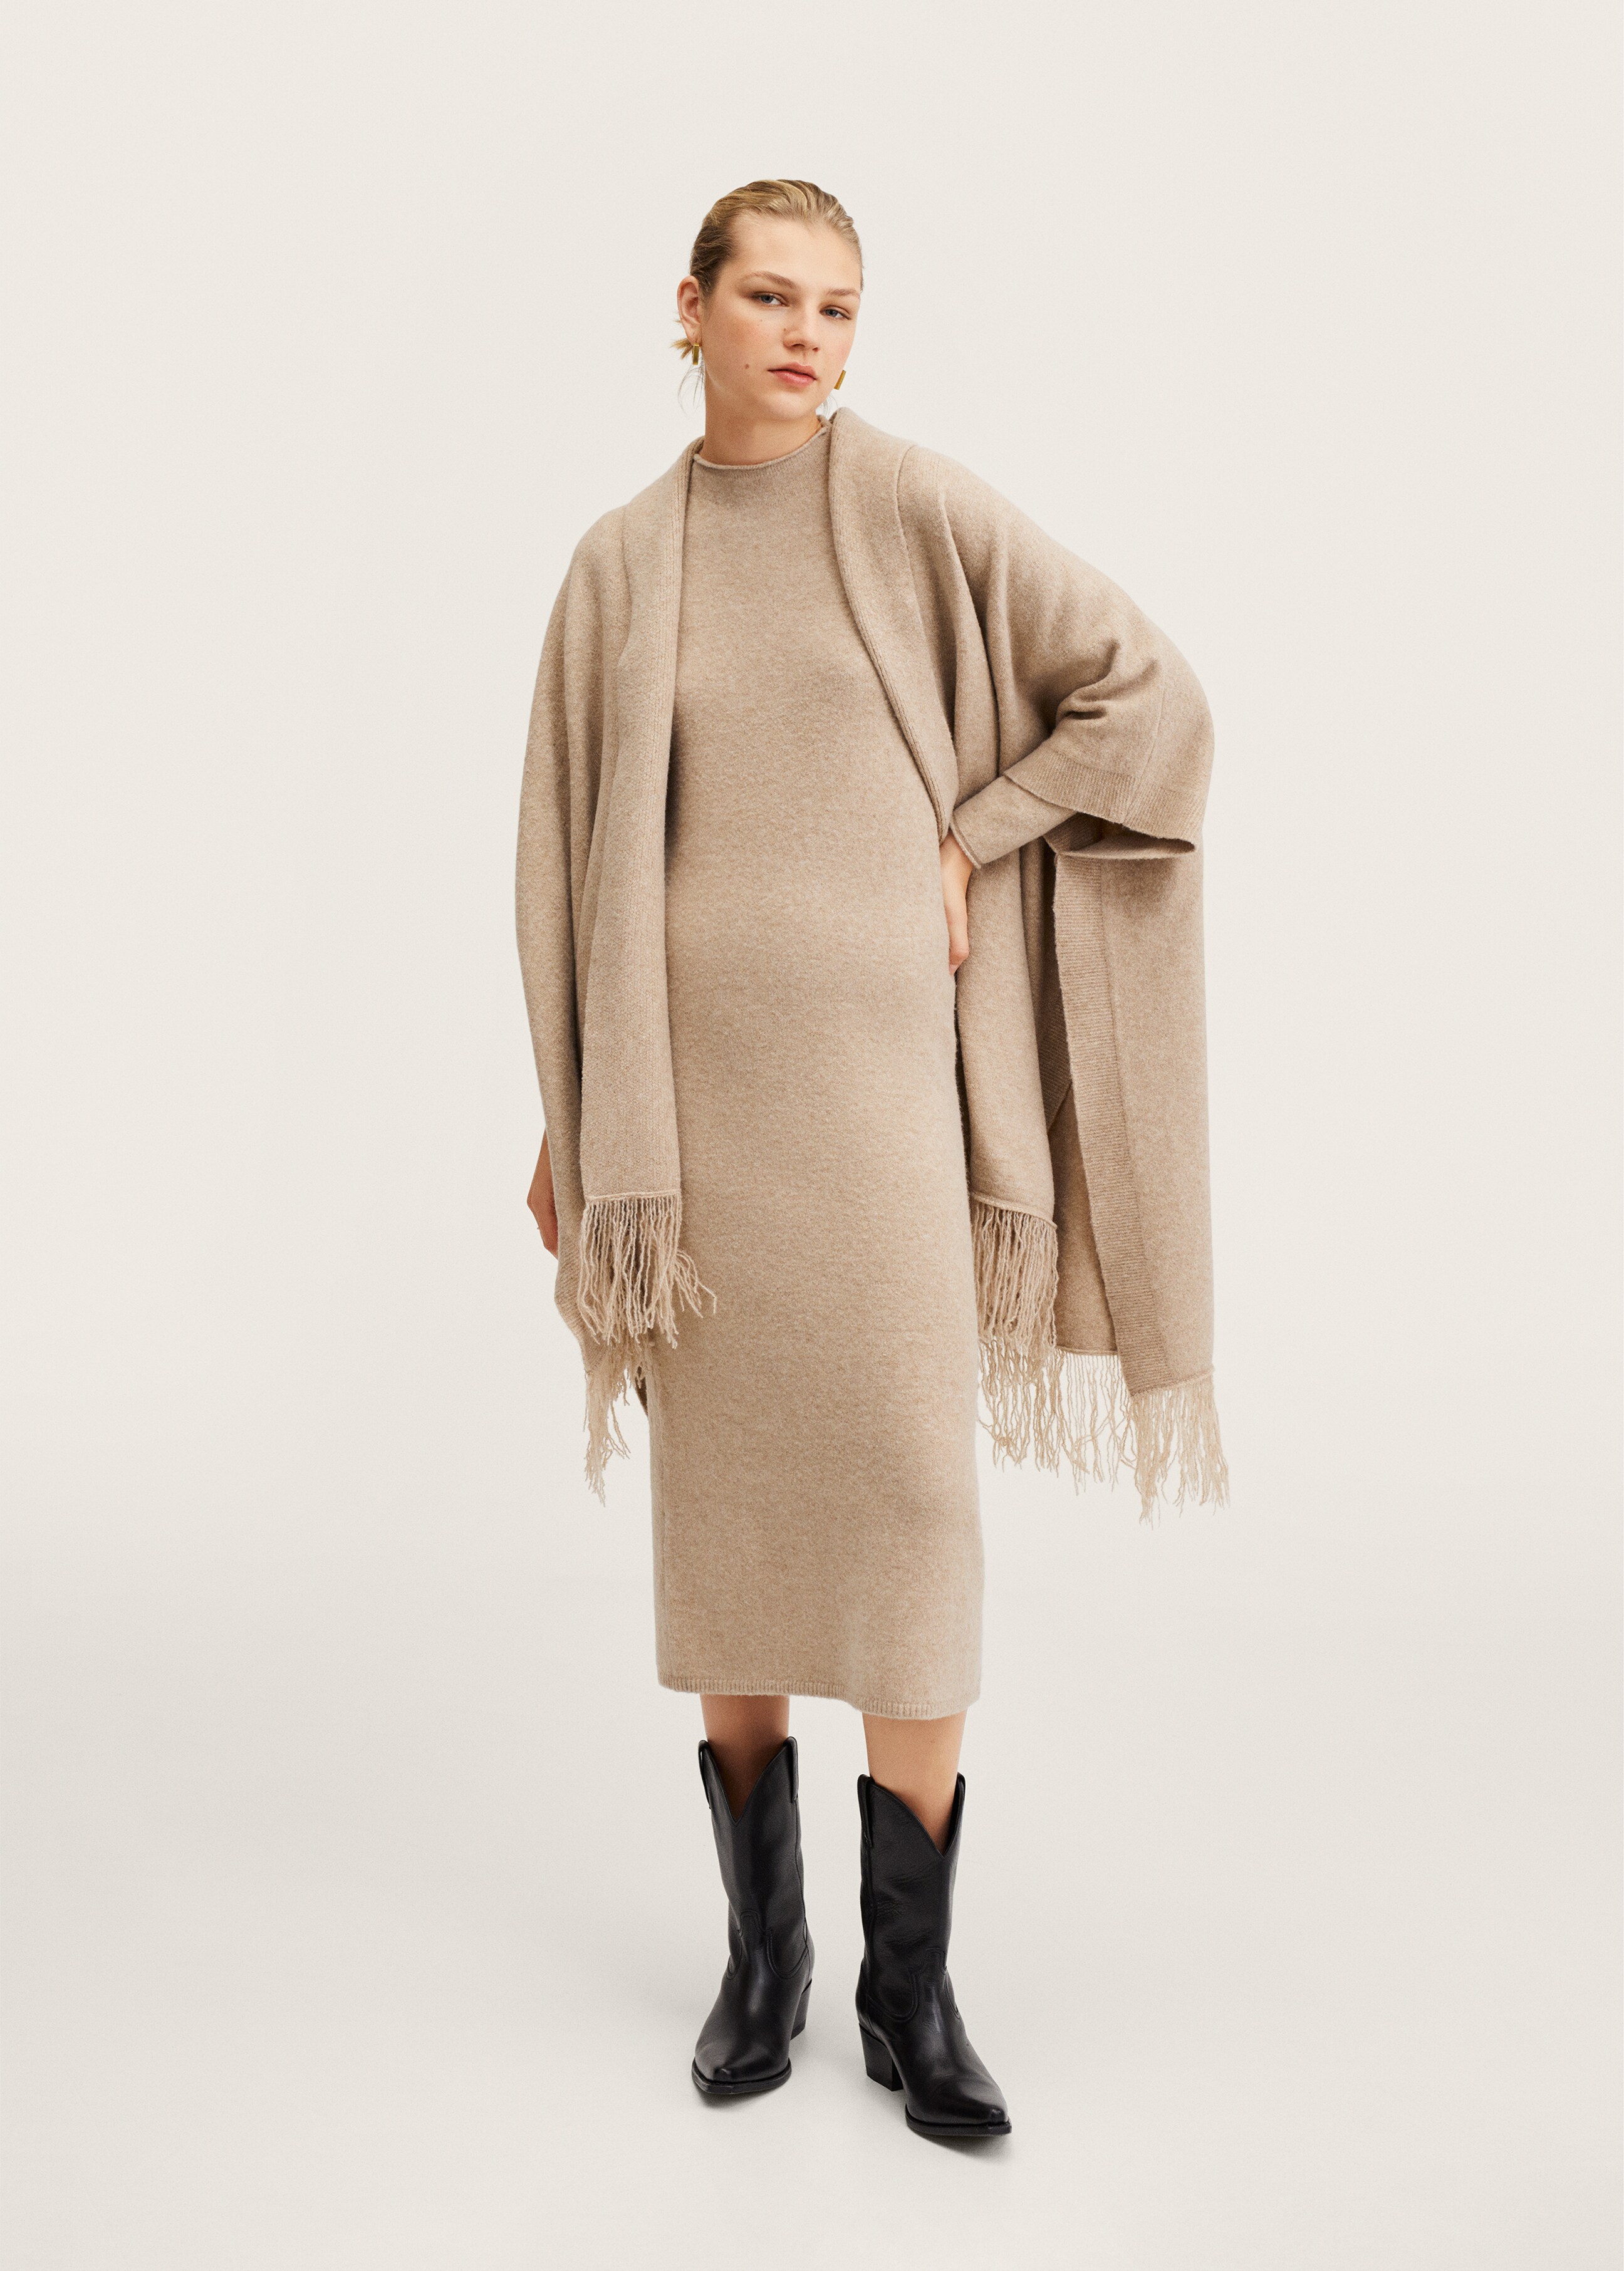 Knitted Perkins neck dress - General plane